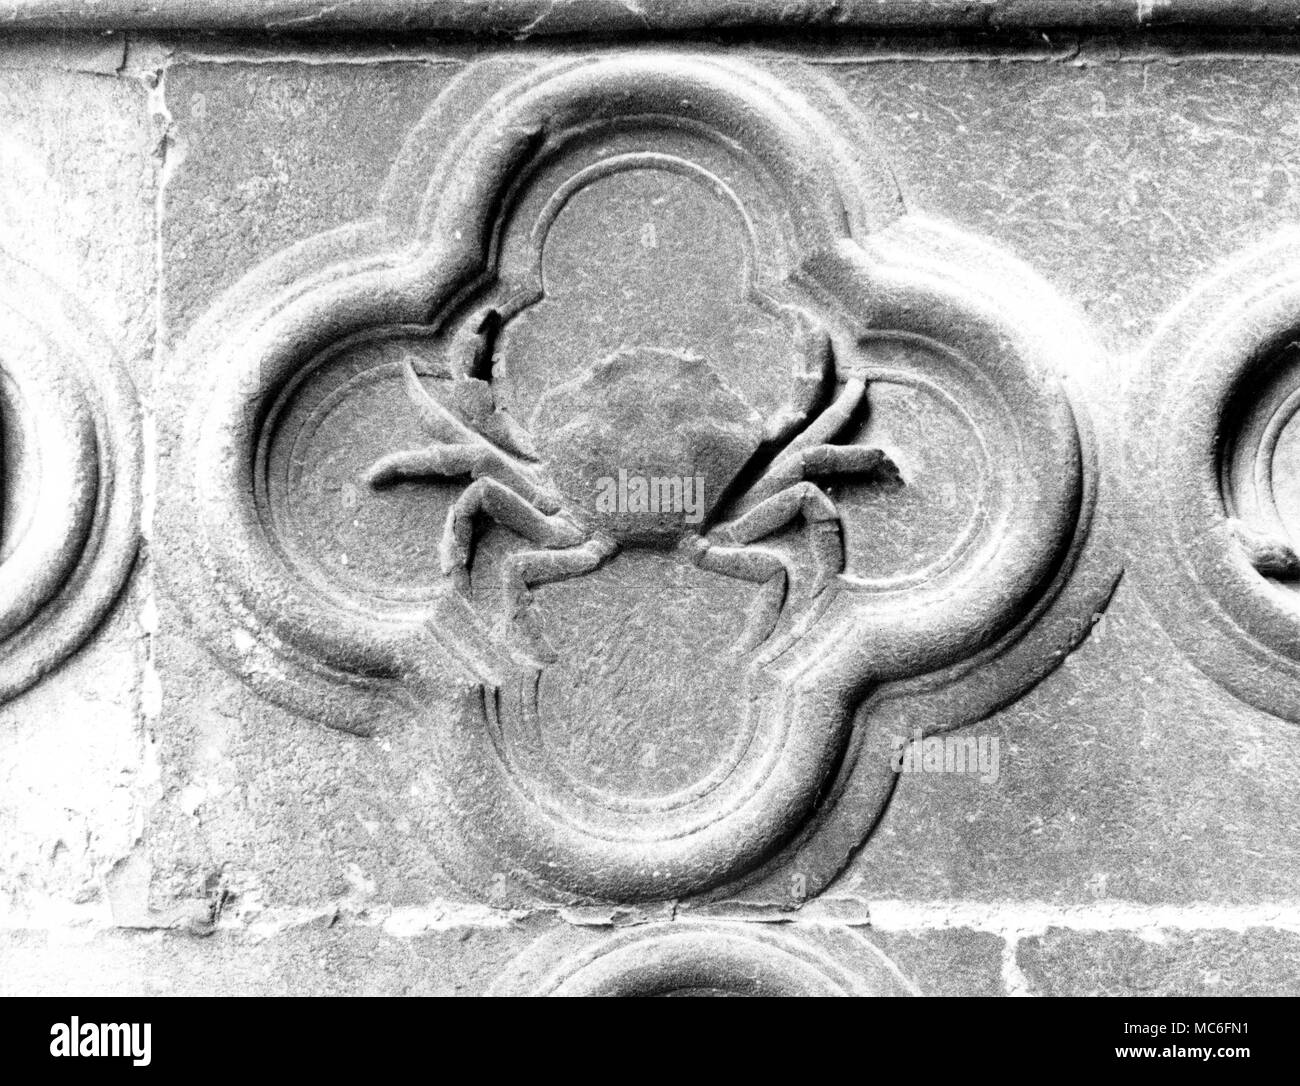 Zodiac signs - Cancer - Bas relief of the sign Cancer, from the zodiacal series on the astrological porch of the Cathedral at Amiens. Early fourteenth century. Stock Photo